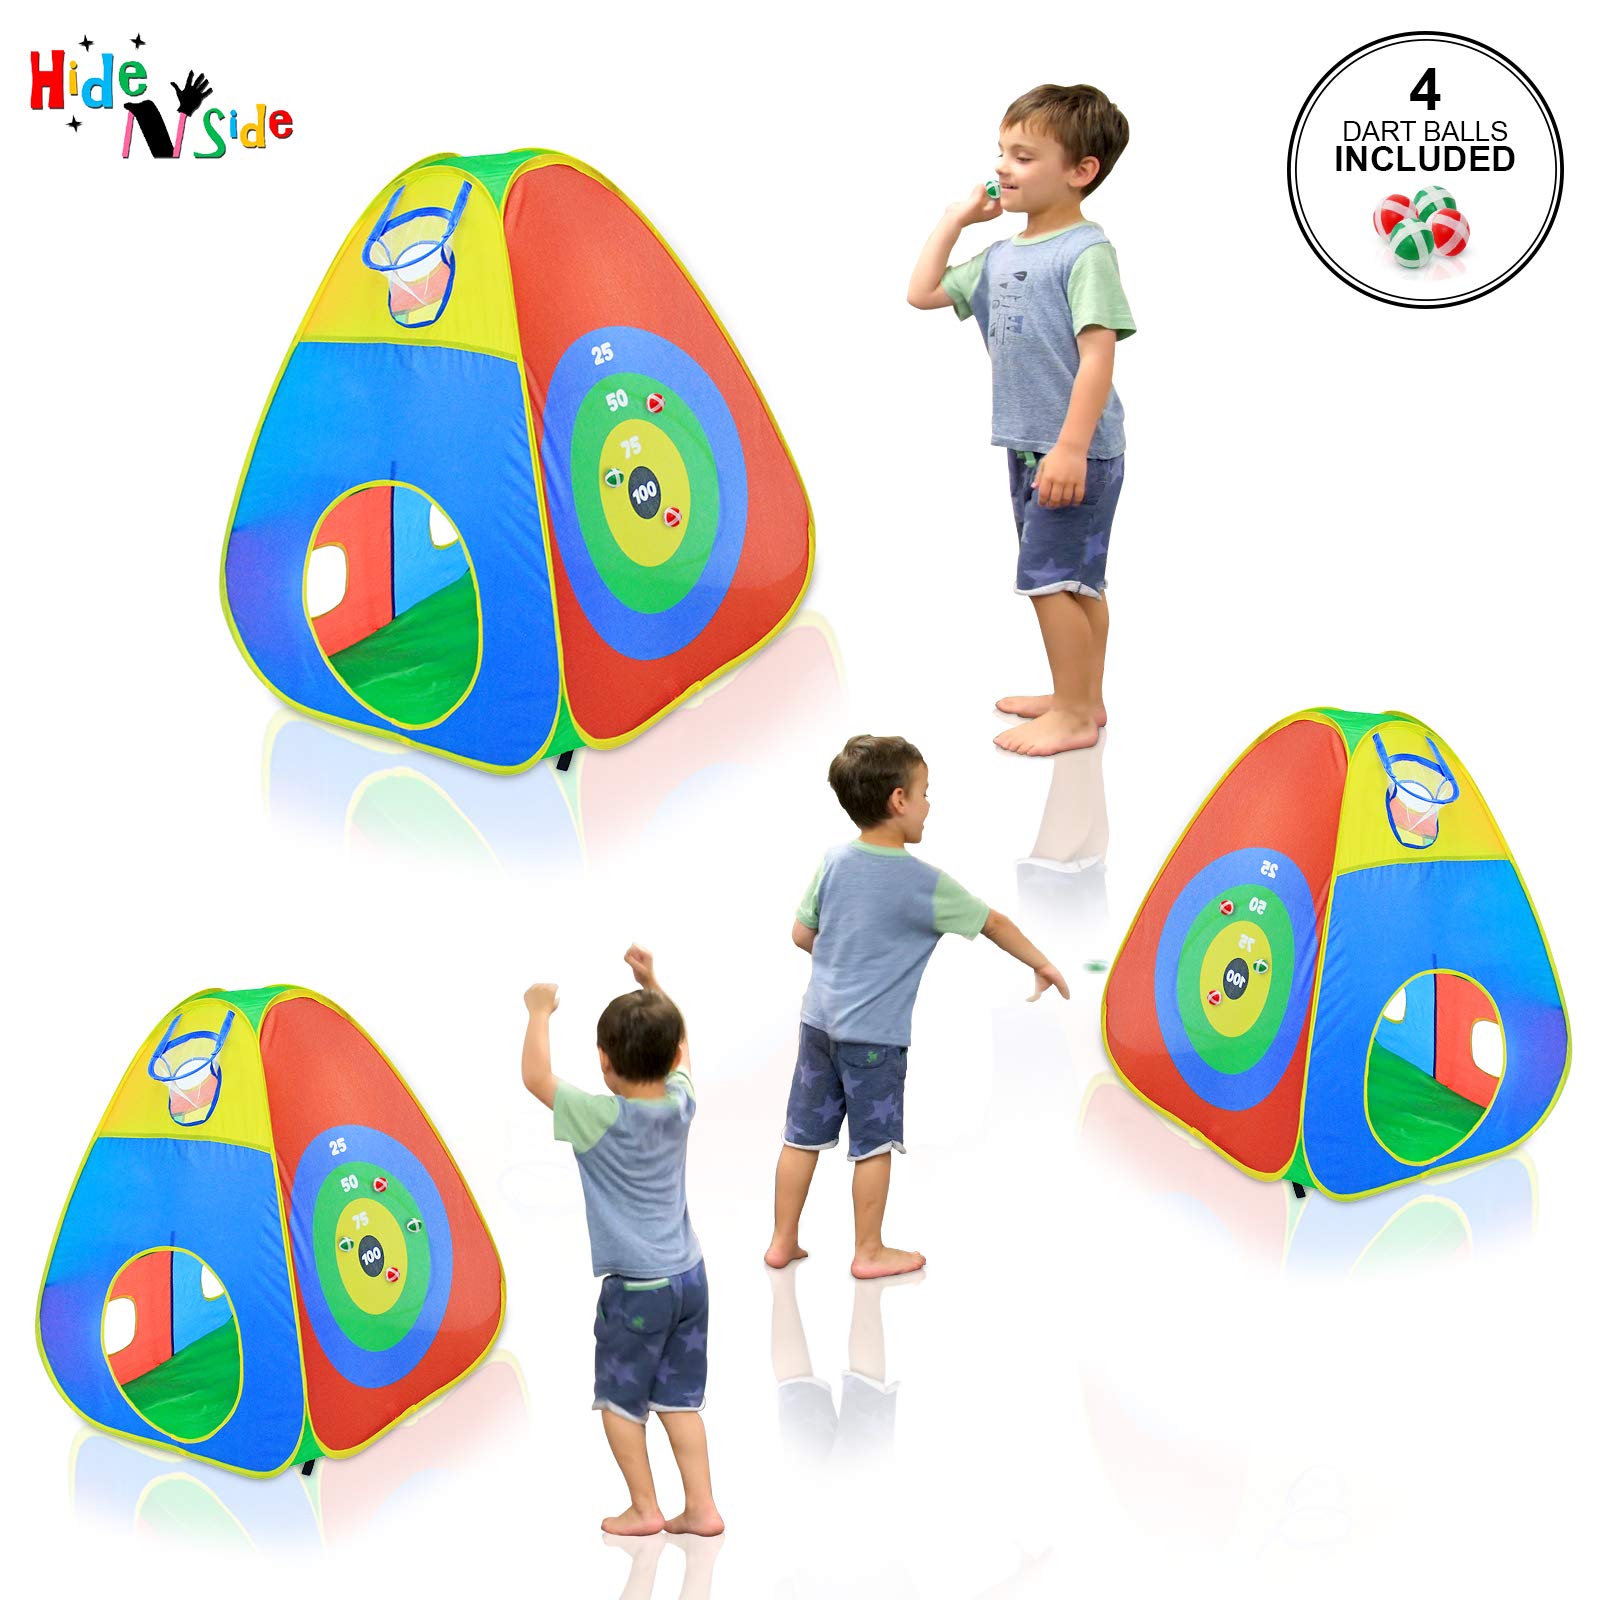 Hide N Side 5pc Kids Ball Pit Tents and Tunnels, Toddler Jungle Gym Play Tent with Play Crawl Tunnel Toy, for Boys Babies Infants Children, Indoor Outdoor Gift, Target Game w/ 4 Dart Balls